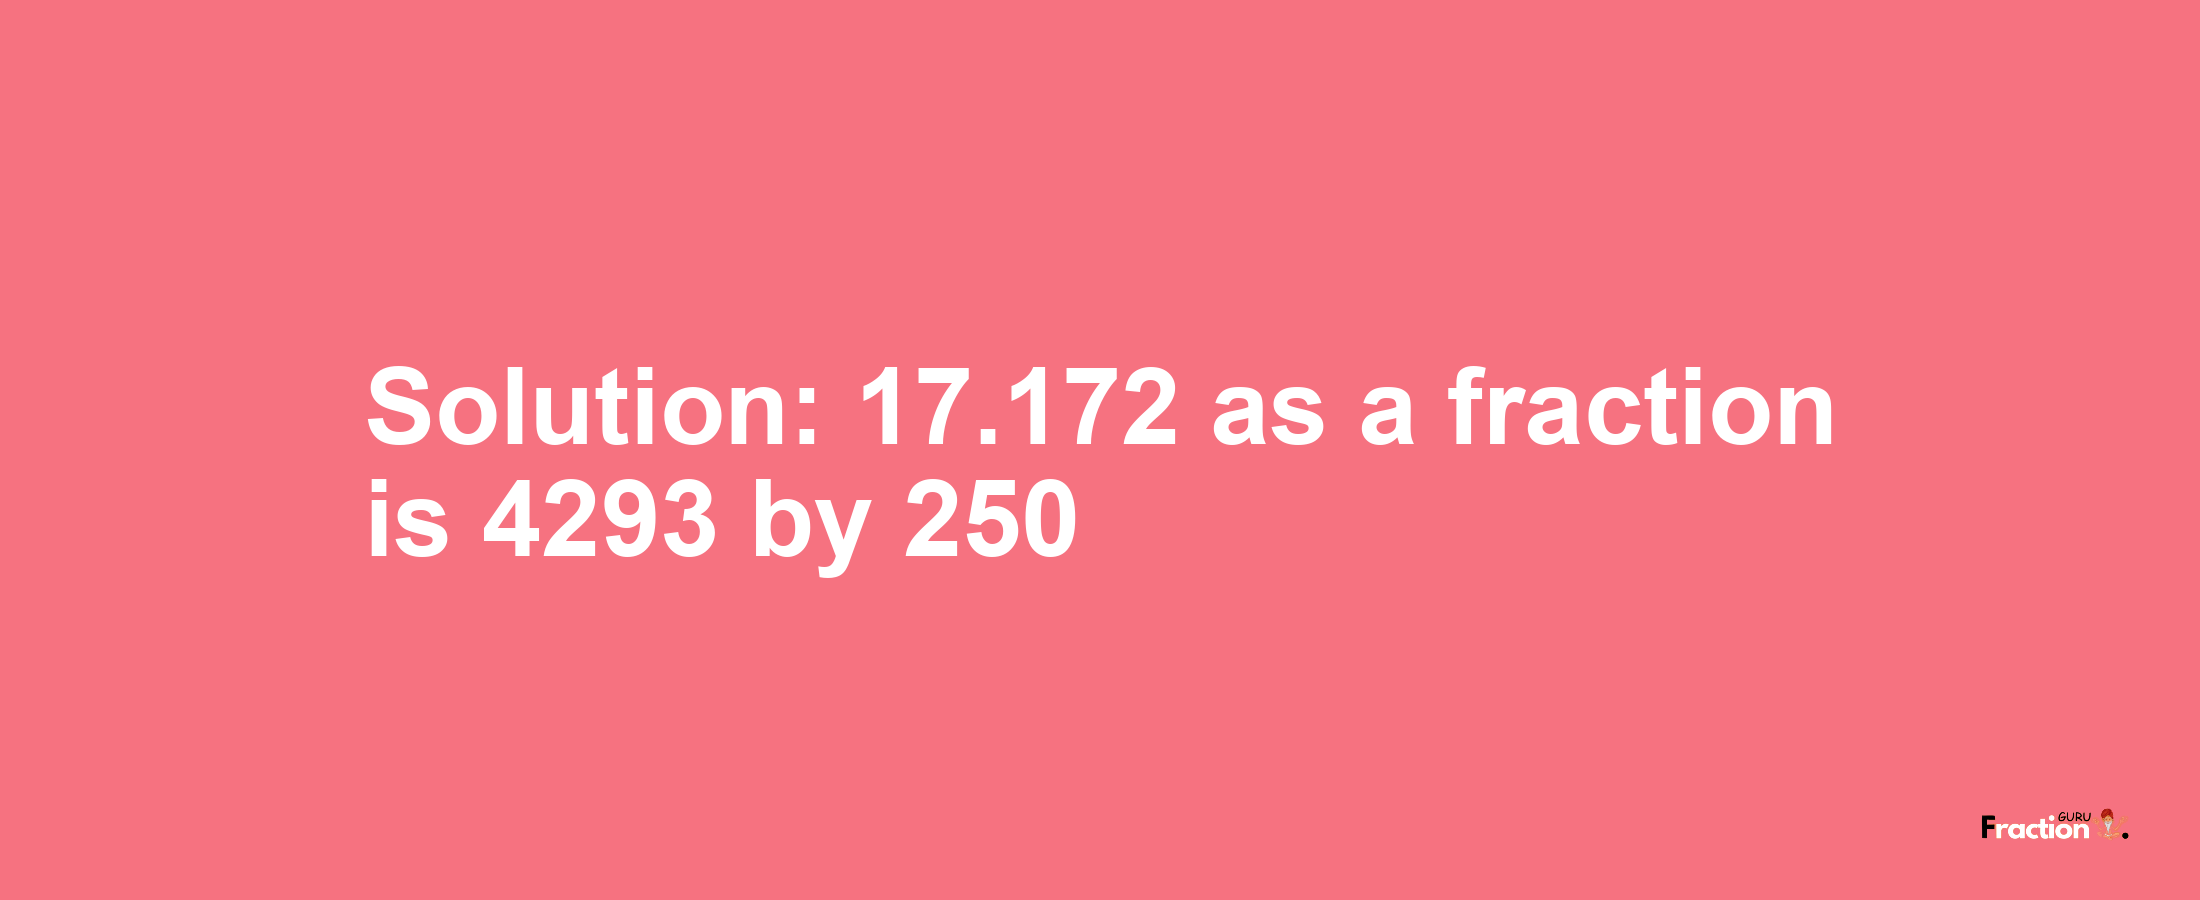 Solution:17.172 as a fraction is 4293/250